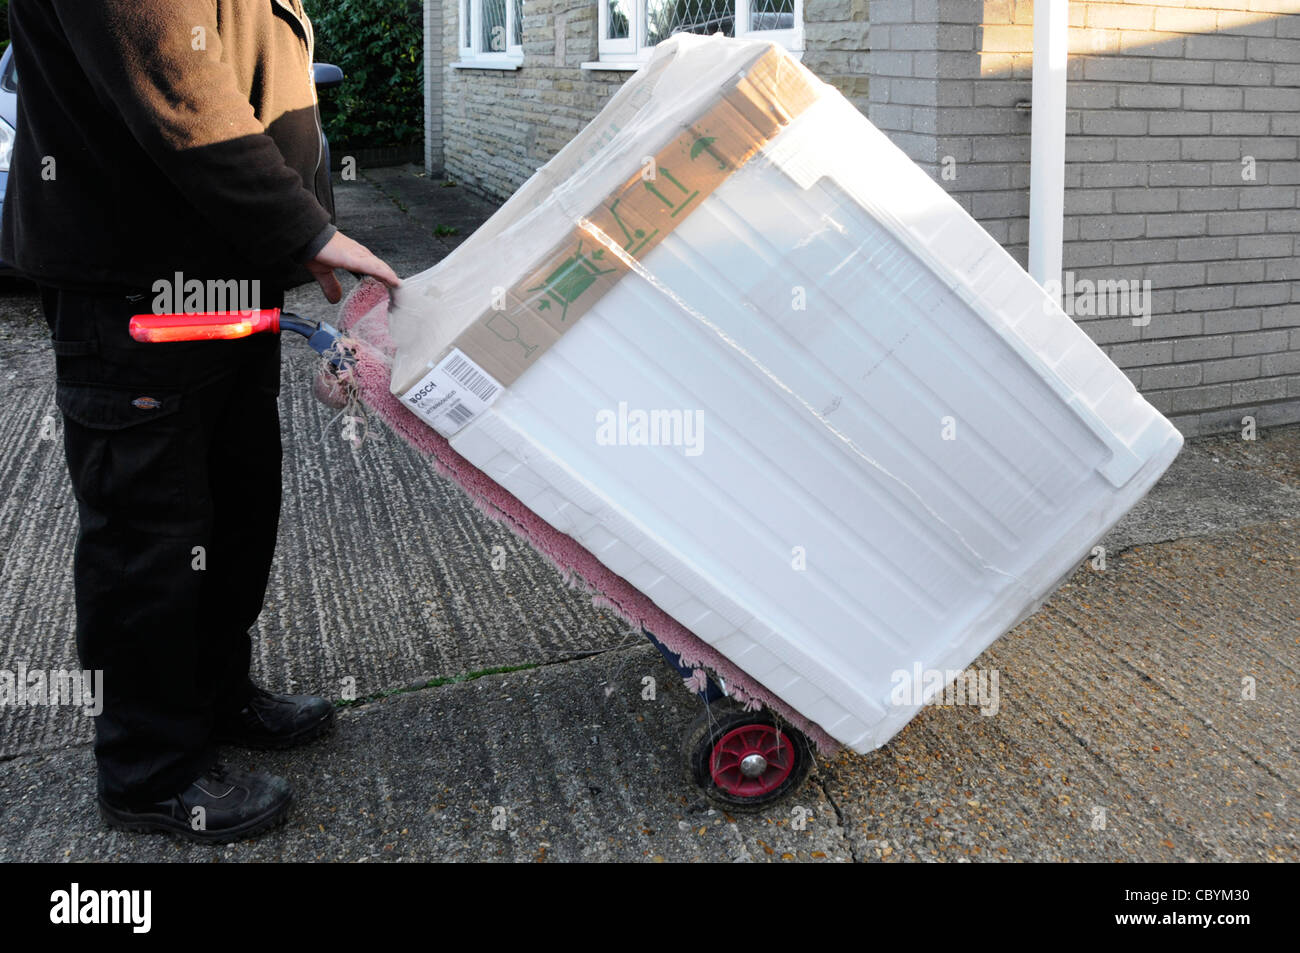 New tumble dryer being delivered by white electrical goods supplier to domestic household Essex England UK Stock Photo